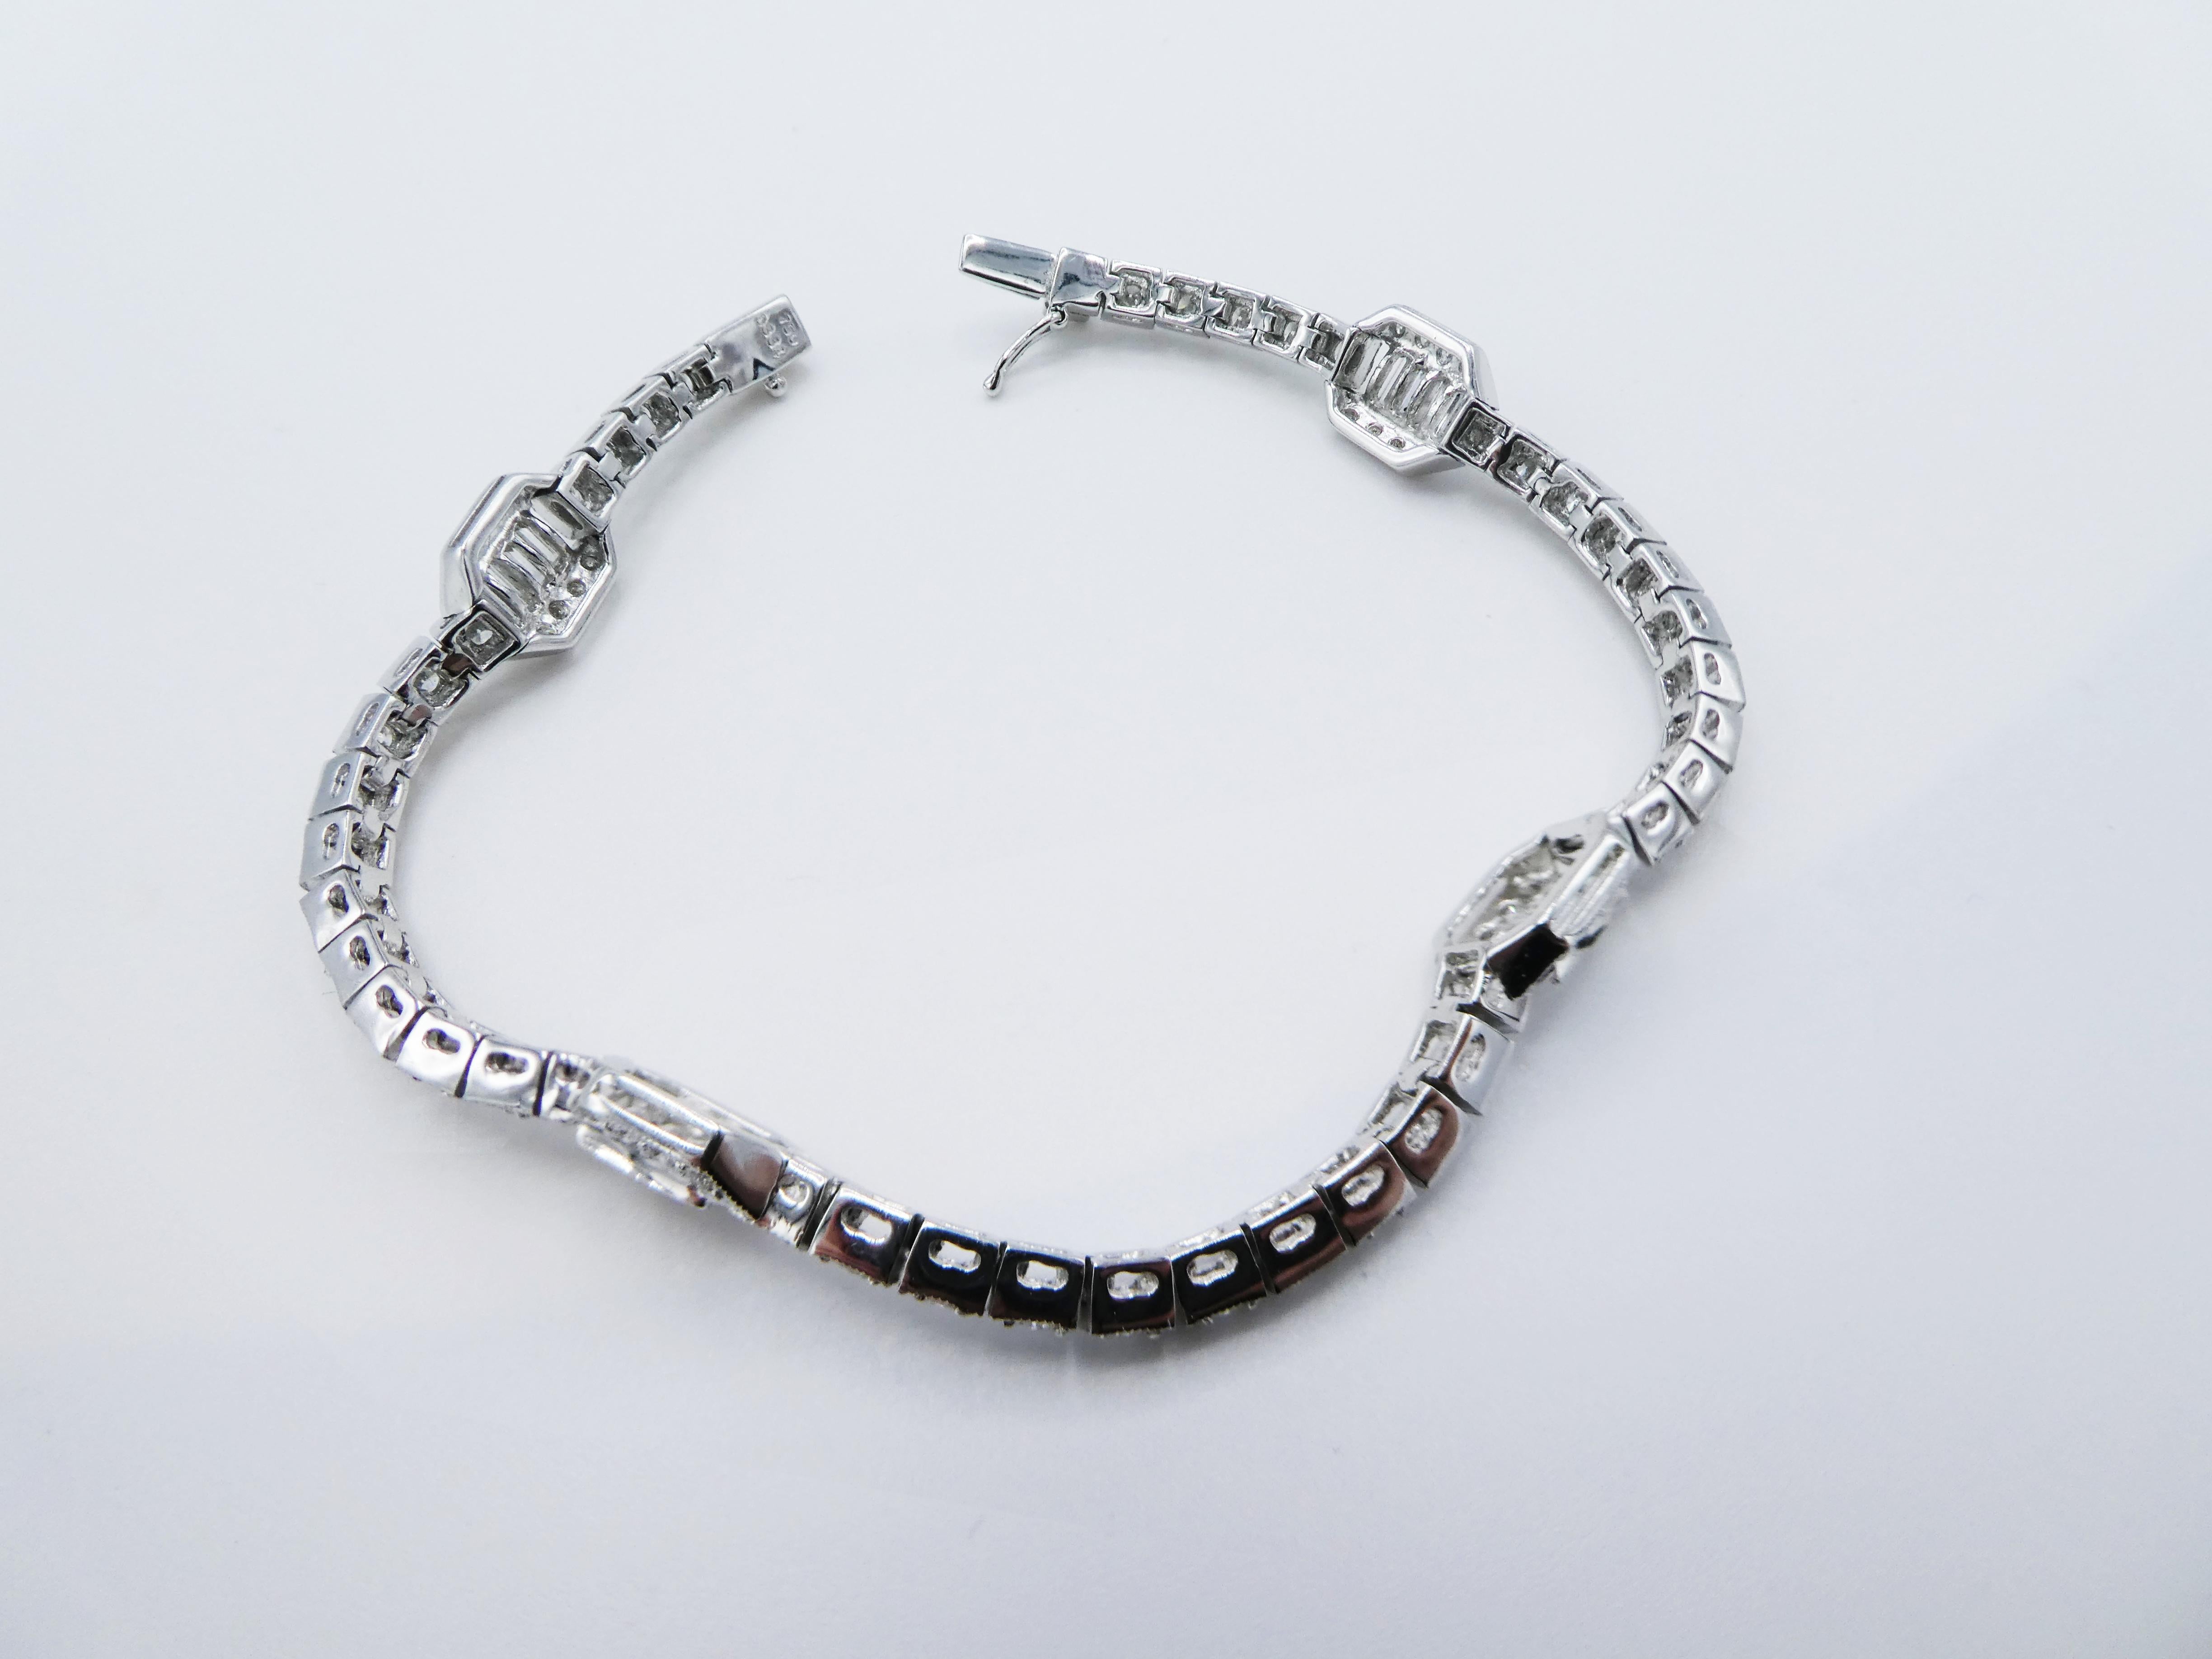 18K White Gold Art Deco Style Diamond Tennis Bracelet 3.34 CTW 

Metal: 18K white gold
Weight: 15.03 grams
Diamonds: 76 Round brilliant and 12 baguette diamonds, 3.34 CTW (marked on clasp) G VS 
Length: 7 inches
Width: 7.9mm at widest, 3mm at